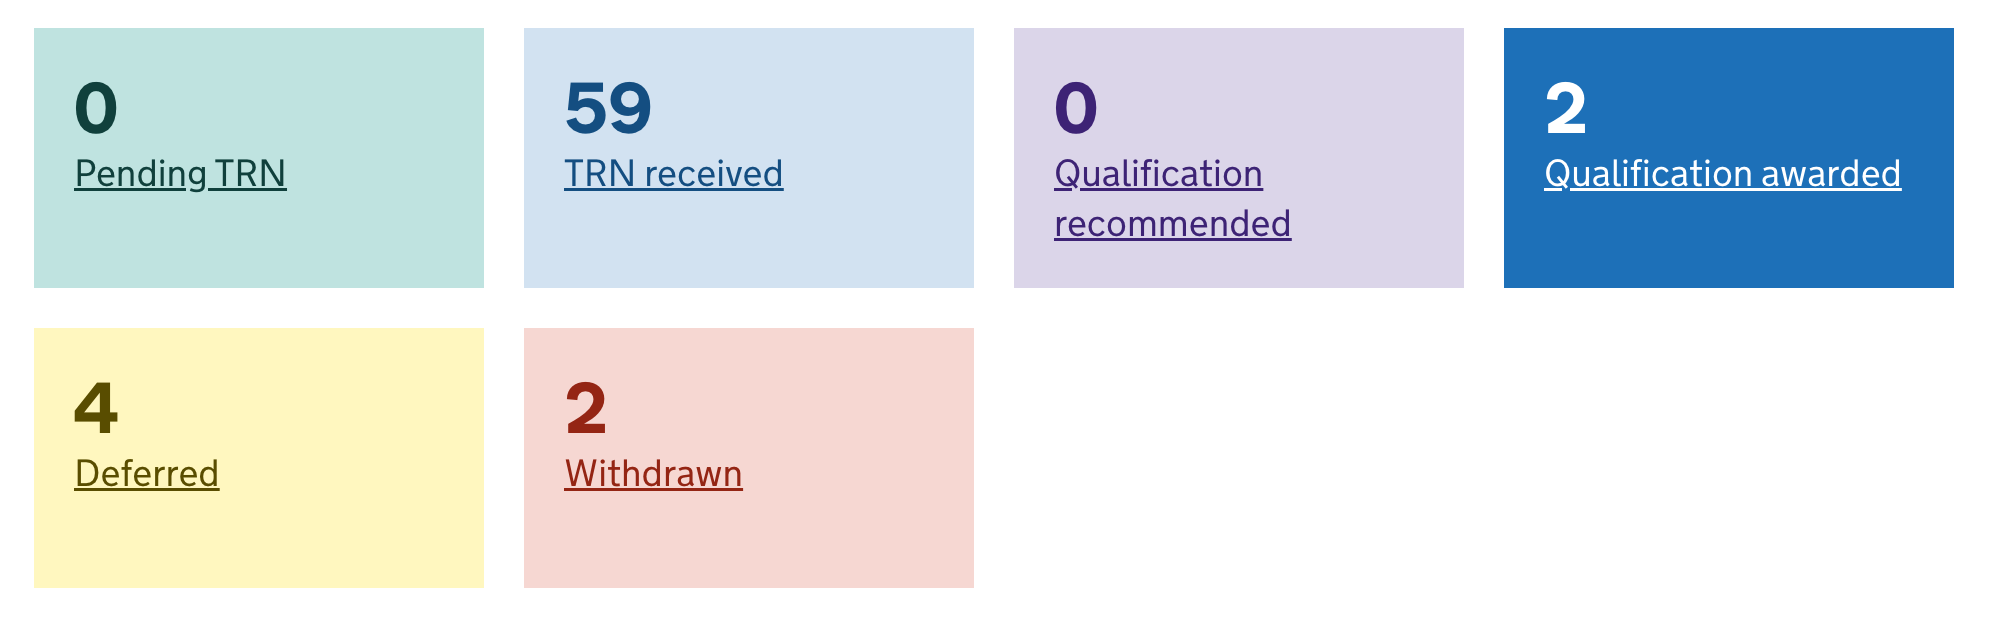 Homepage status boxes with zero trainees in ‘Pending TRN’ and ‘Qualification recommended’ statuses